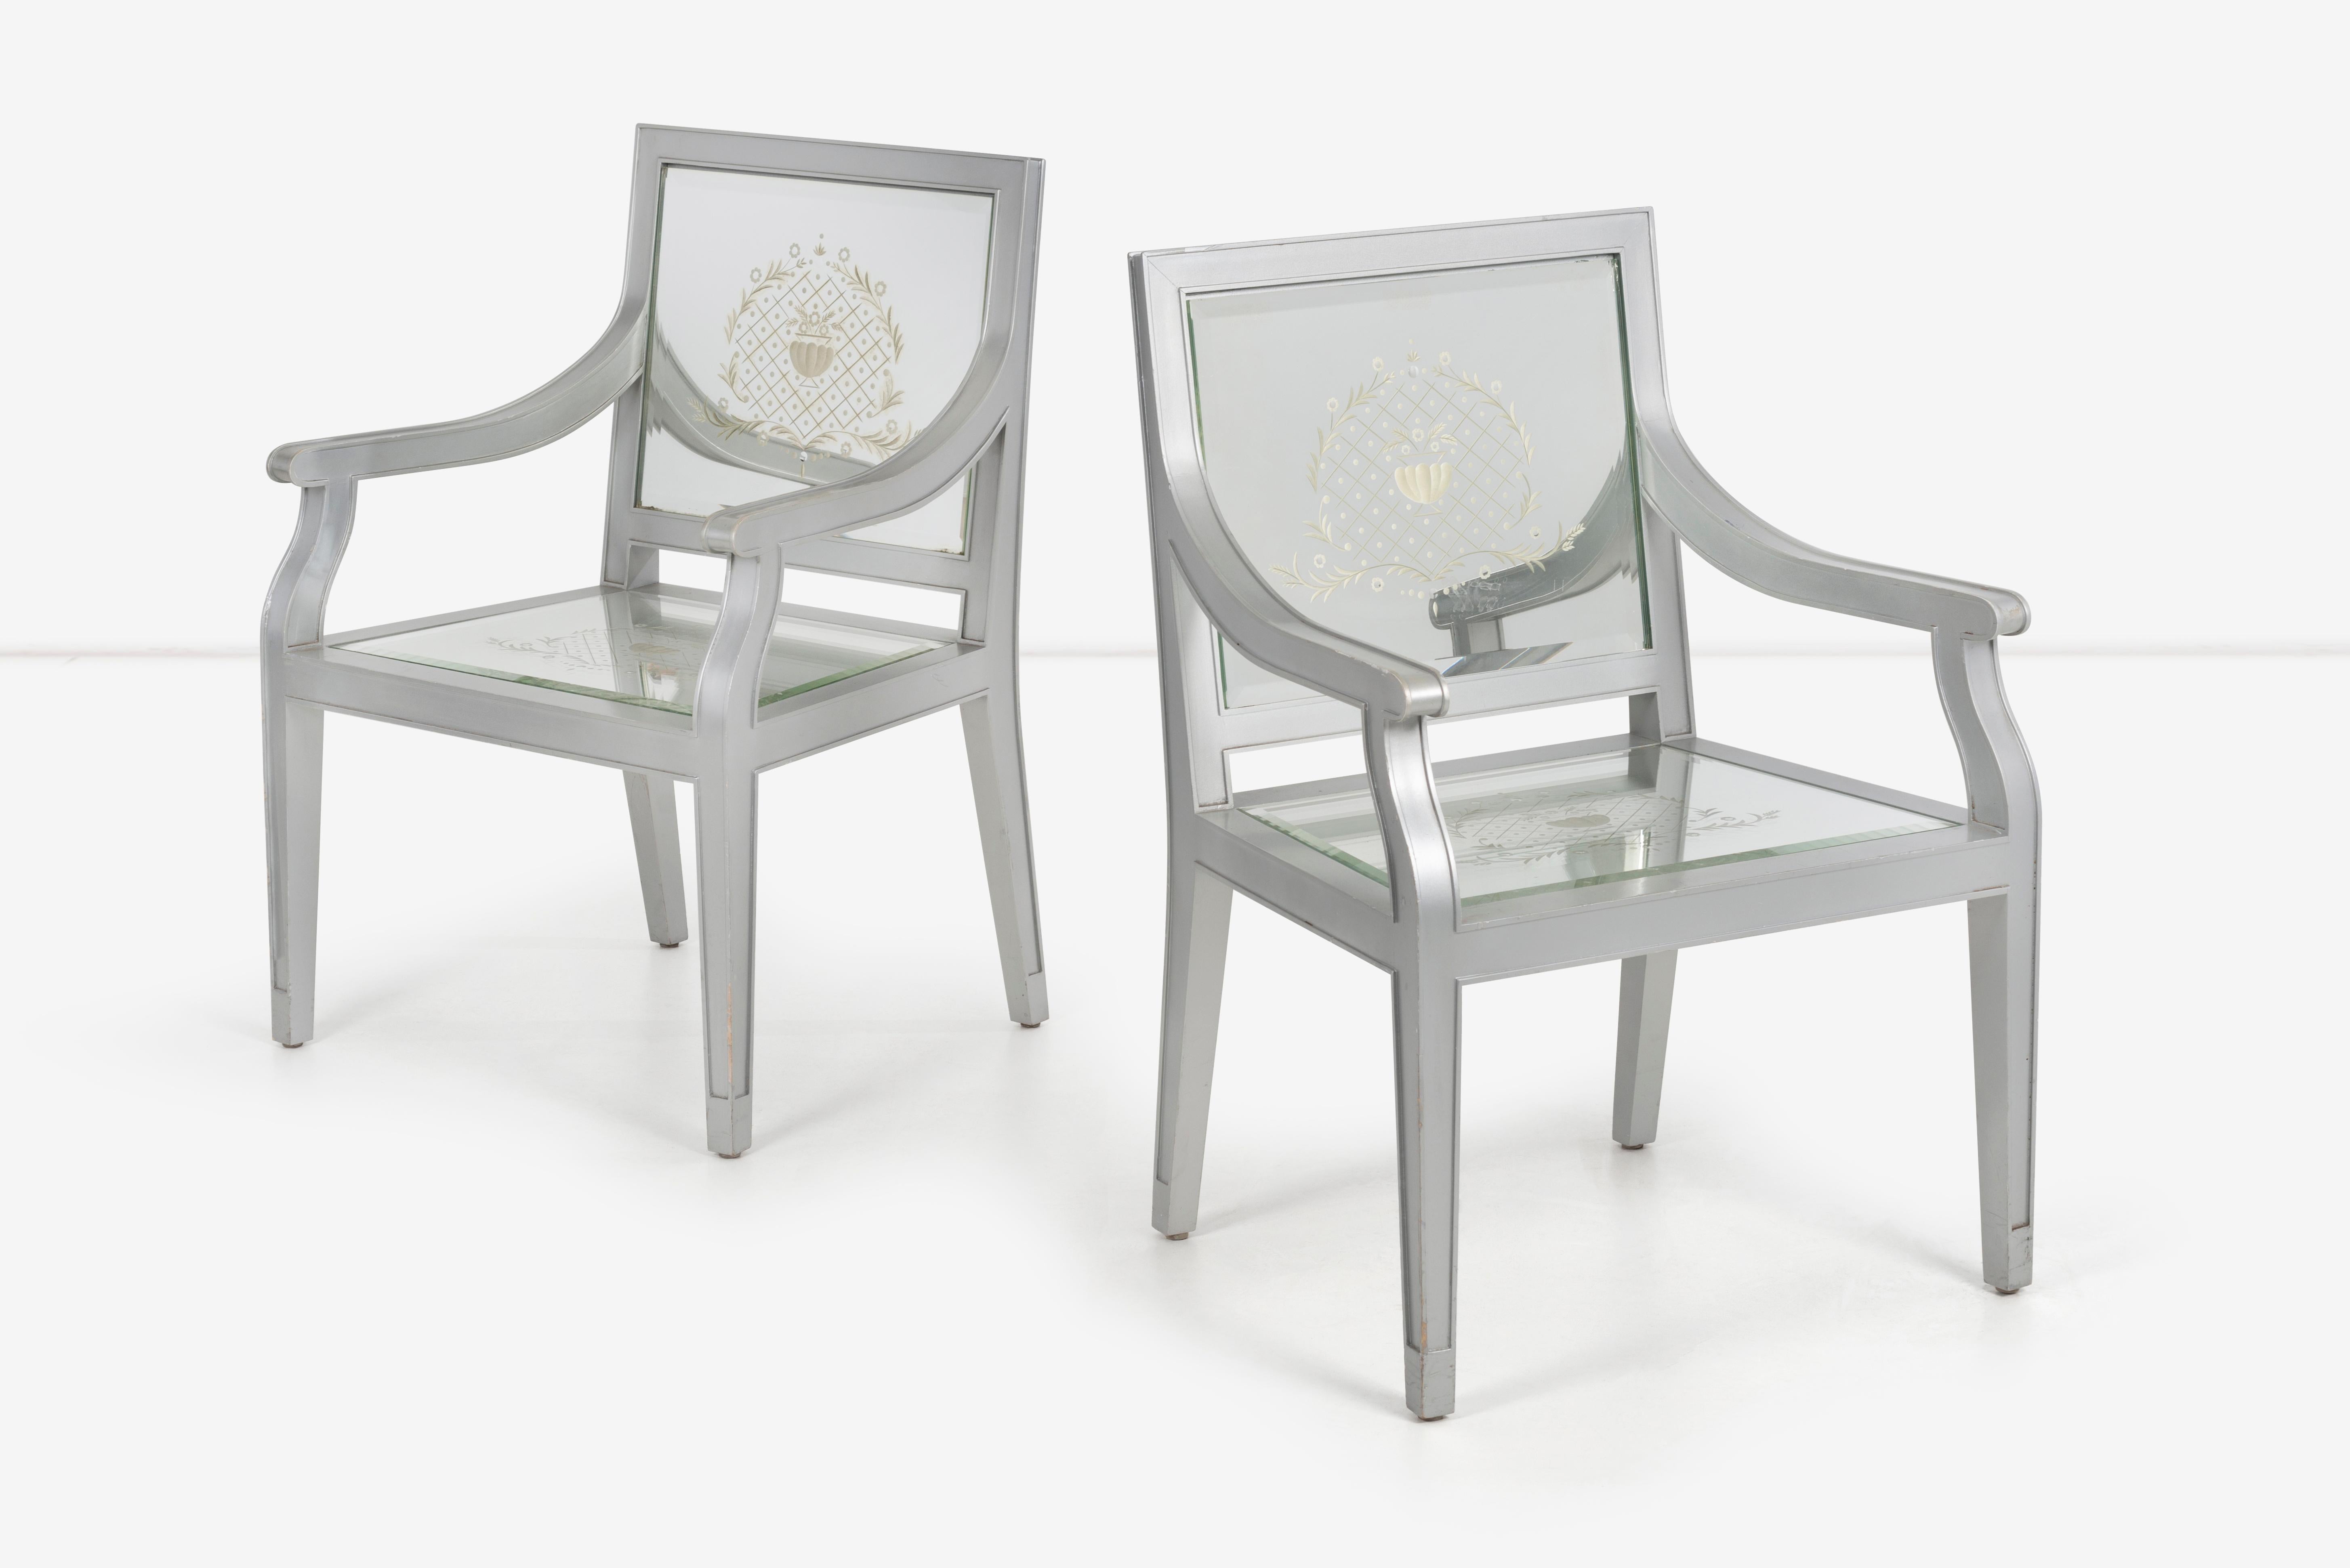 Custom Phillip Starck mirrored Louis XVI style chairs, Cliff Hotel San Francisco, silver painted wood with cut mirrored glass on seat and back designs by Thierry Duclos of Mirostyle, Paris.